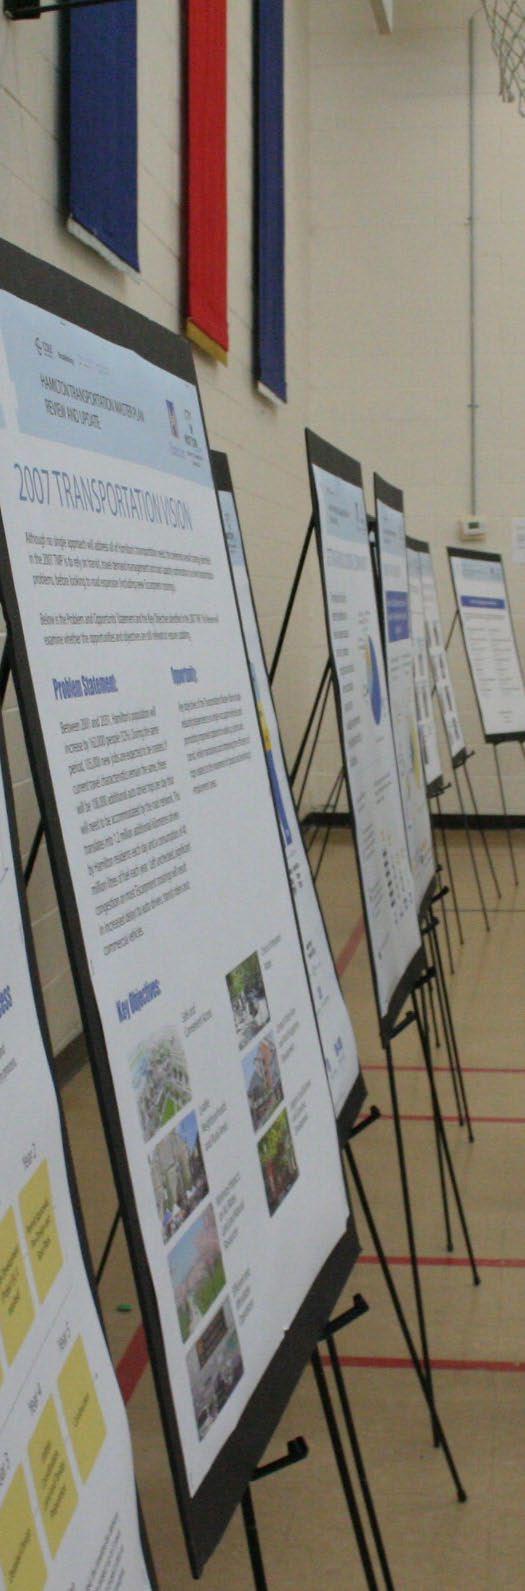 Hamilton Transportation Master Plan Review and Update Public Information Centres One - March 23 to March 26, 2015 Purpose The purpose of the workshops was to engage citizens in a productive dialogue